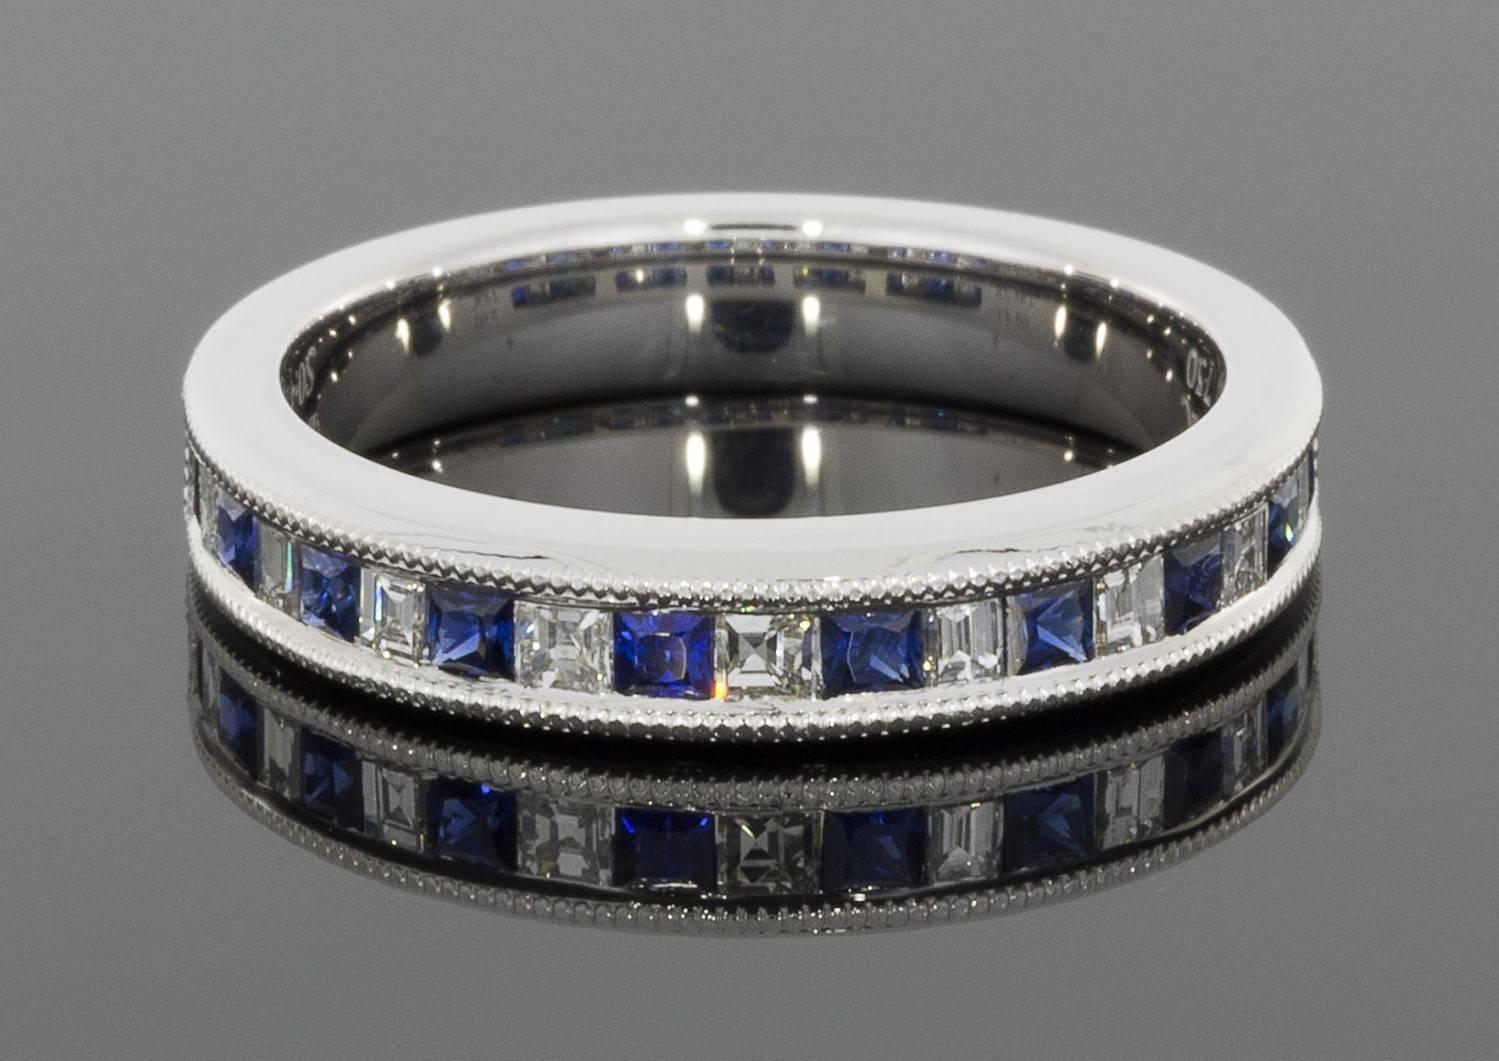 This beautiful & unique band ring features natural, AAA quality, princess cut, blue sapphires & sparkly, G/VS quality, asscher or square baguette cut diamonds. The sapphires have a combined weight of .41 carat & the diamonds have a